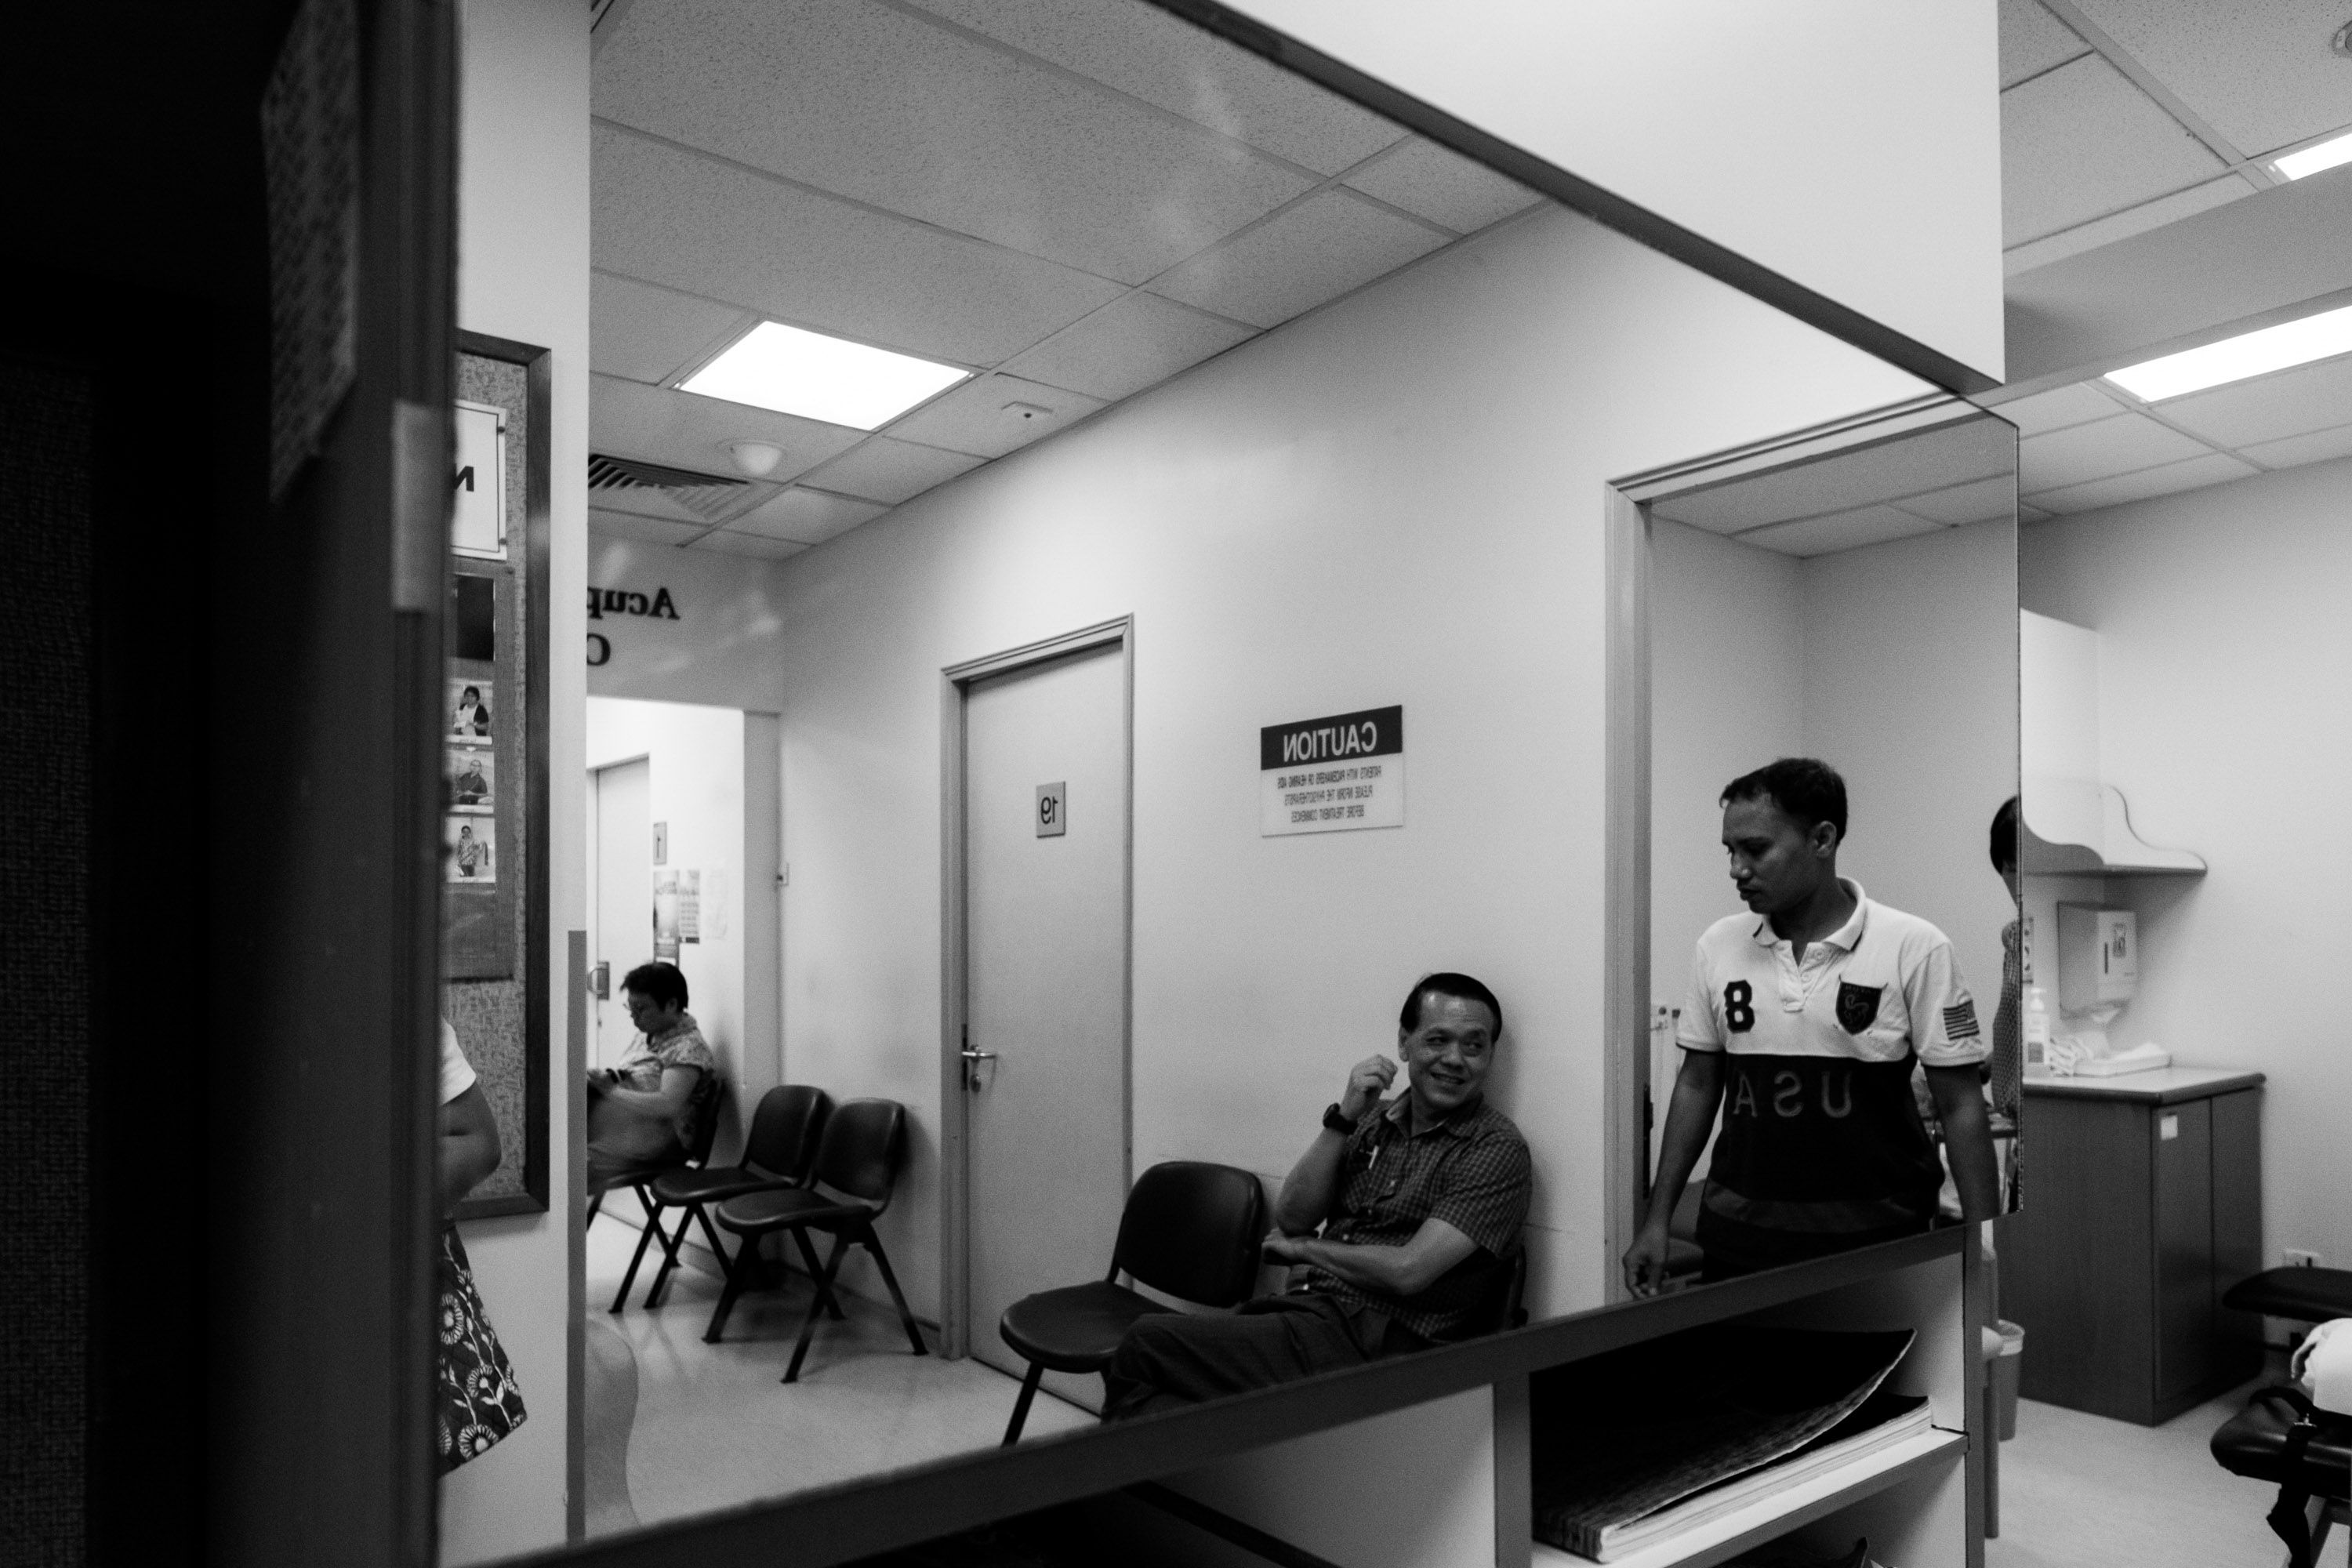 Mr. Haque leaving the doctor's office after his physical therapy session. Image by Xyza Bacani. Singapore, 2016.